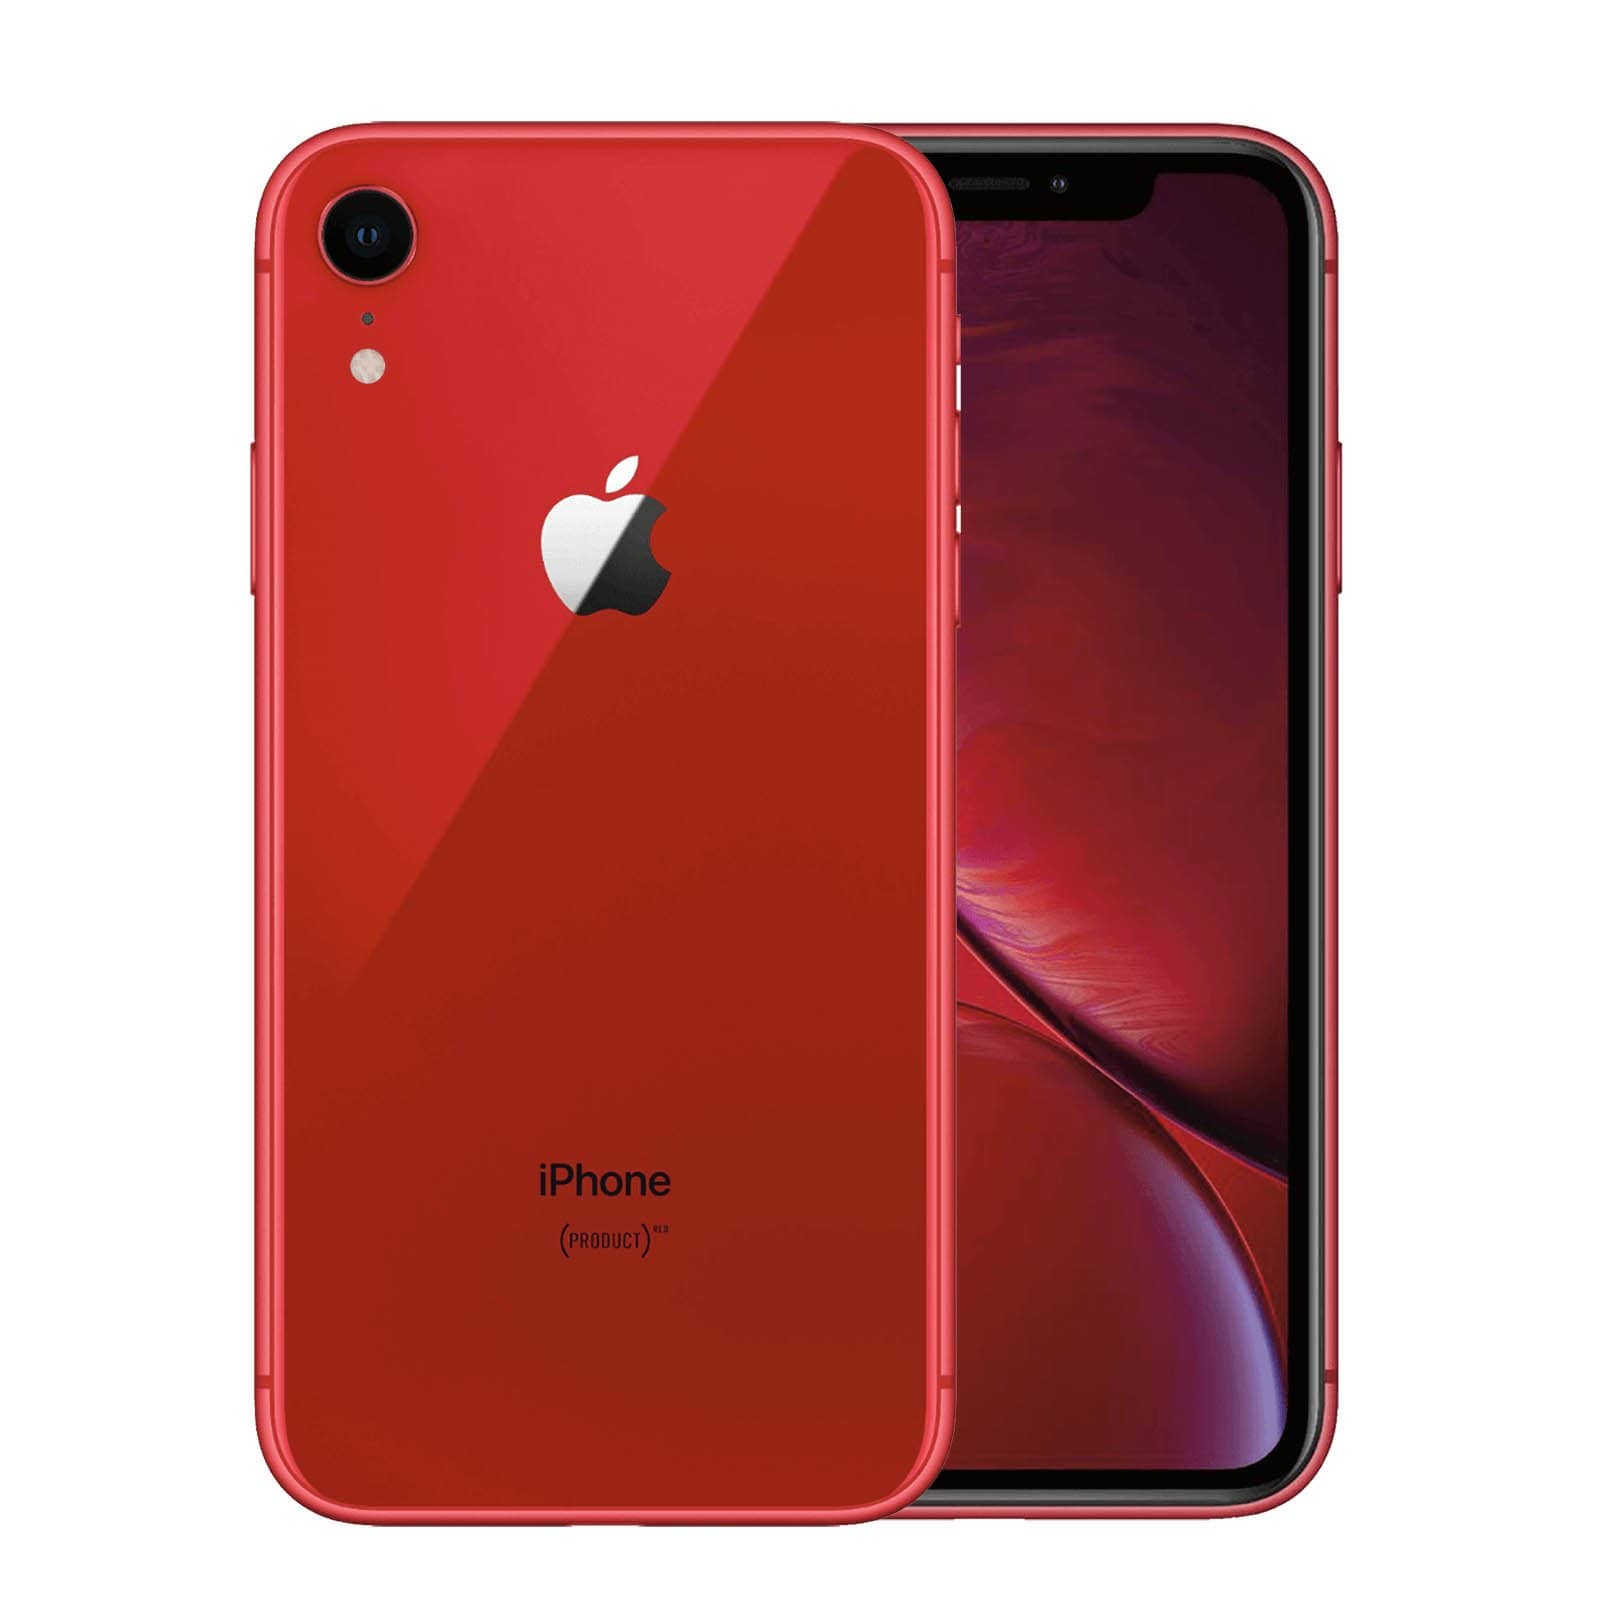 Apple iPhone XR 128GB Product Red Good - Unlocked 128GB Product Red Good